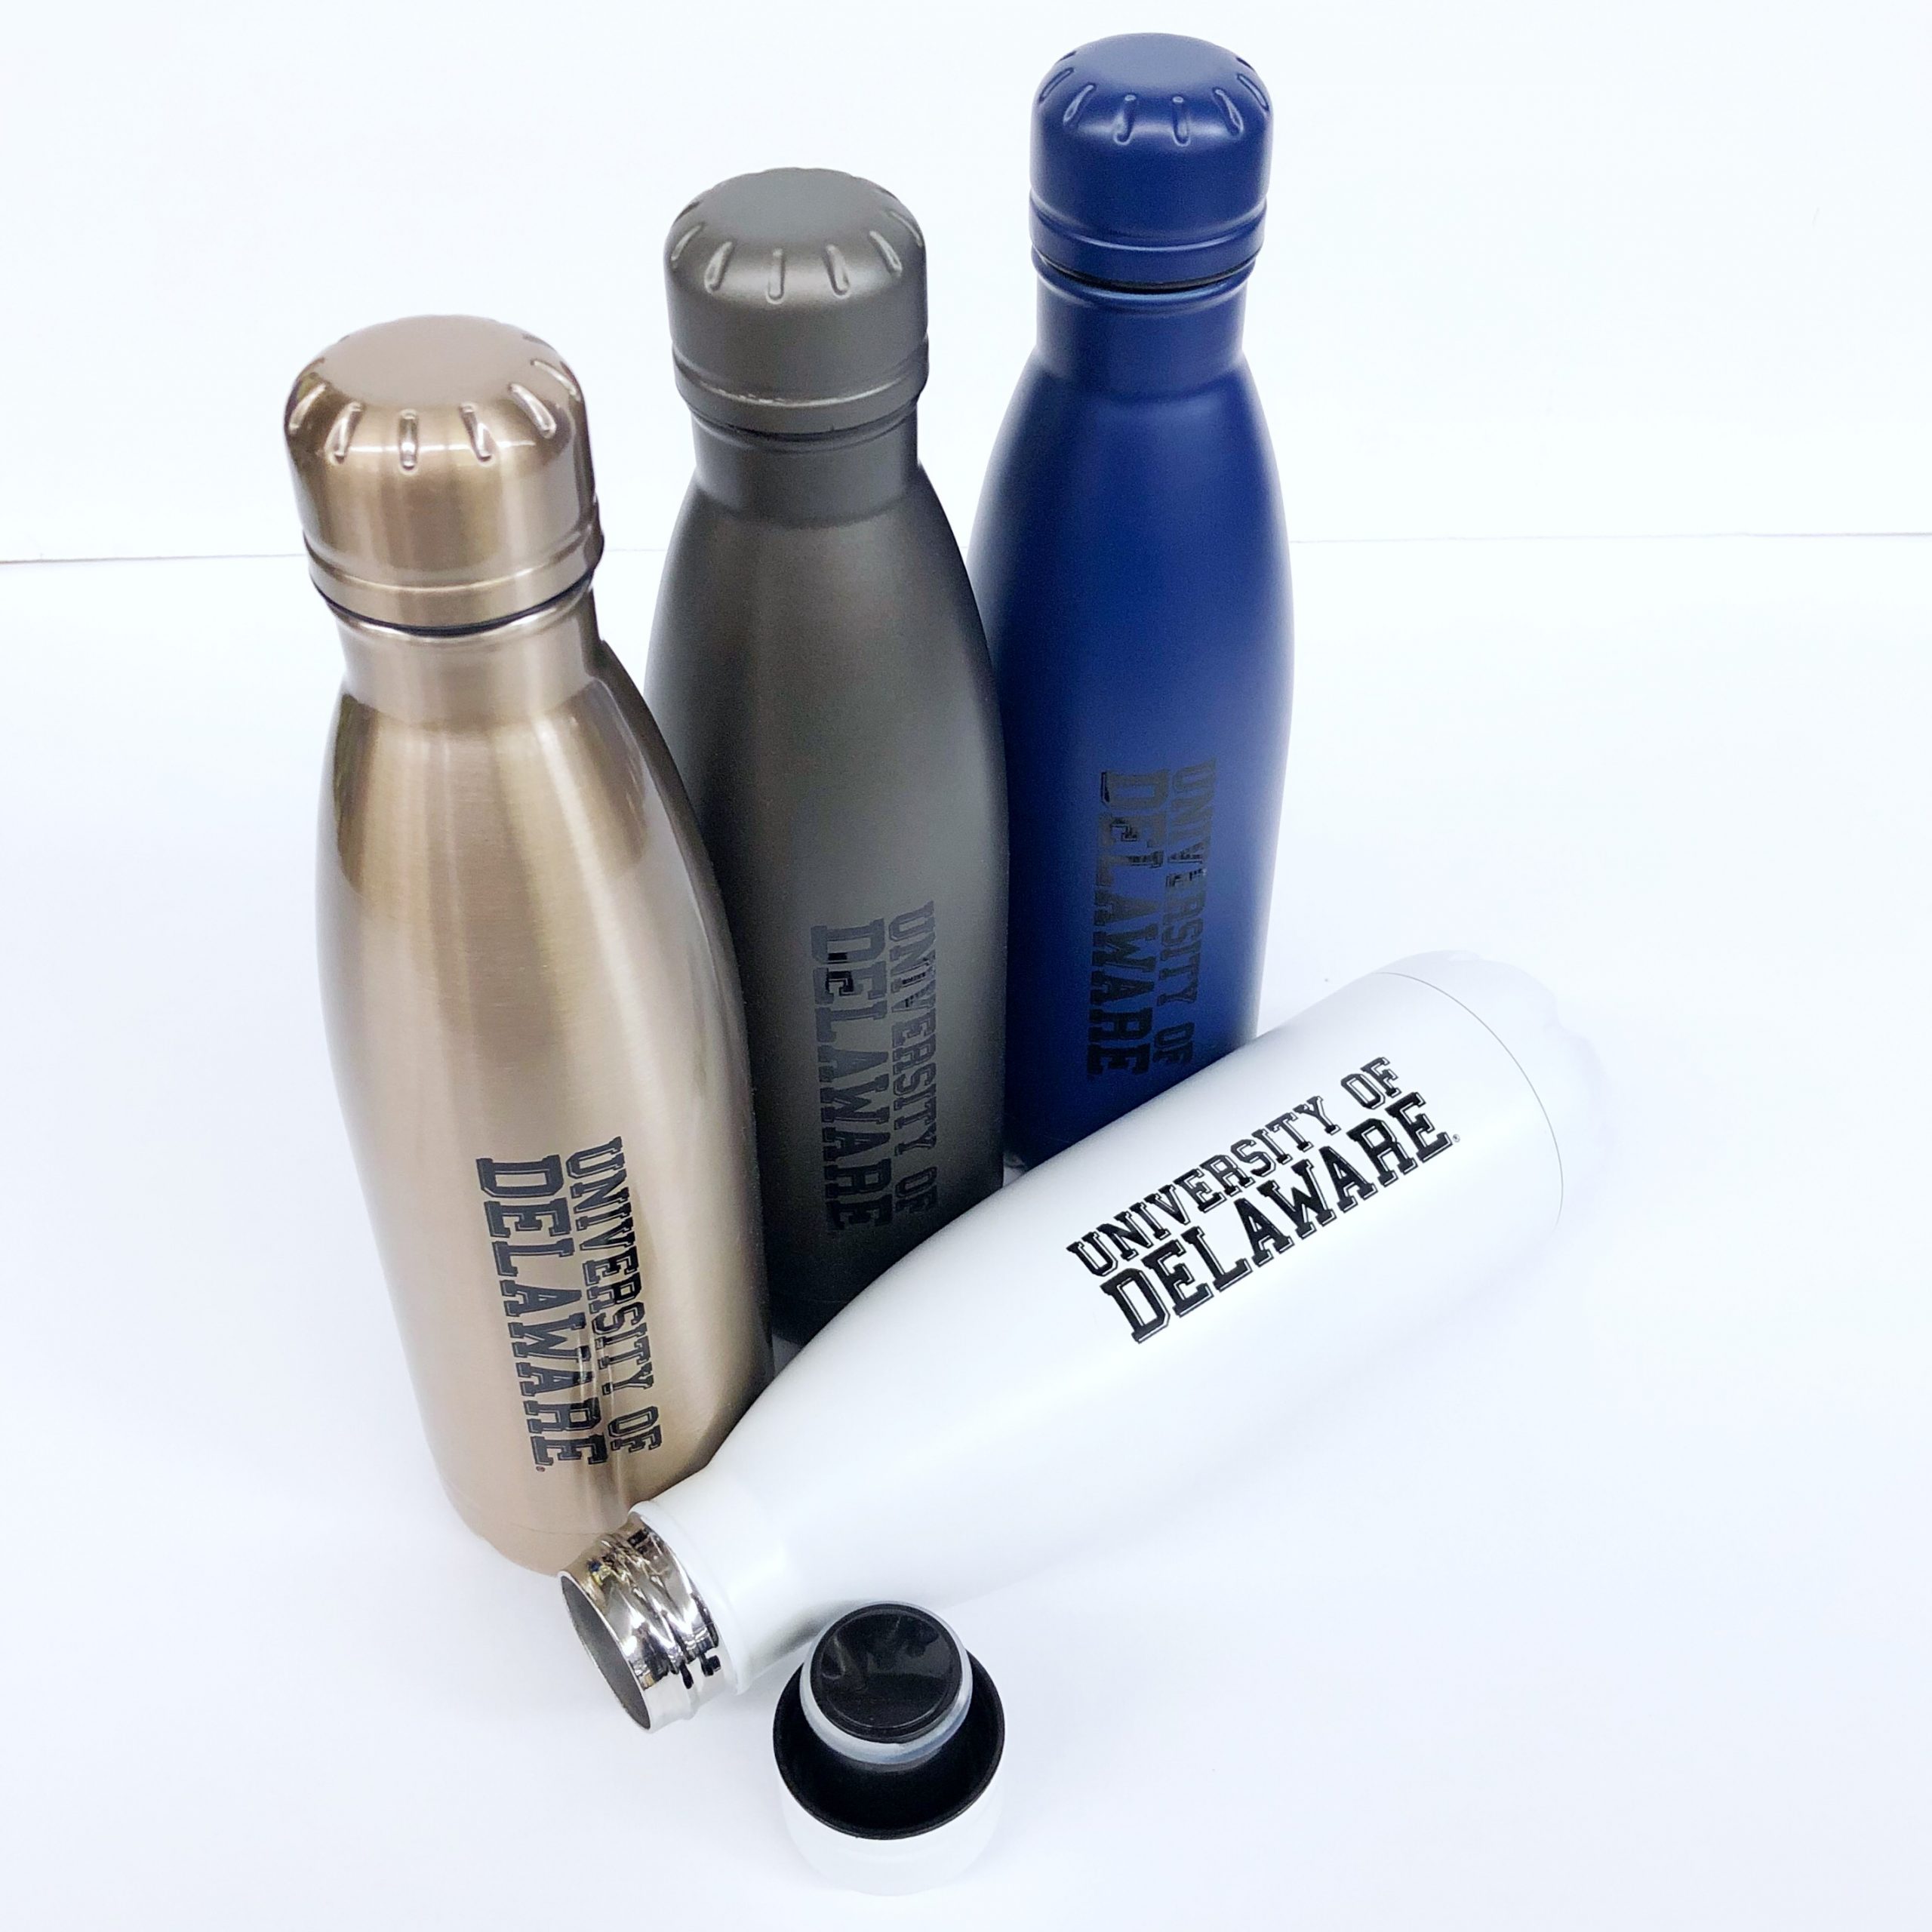 https://www.national5and10.com/wp-content/uploads/2019/06/University-of-Delaware-Insulated-22Swell22-Style-Water-Bottle-4-scaled.jpg